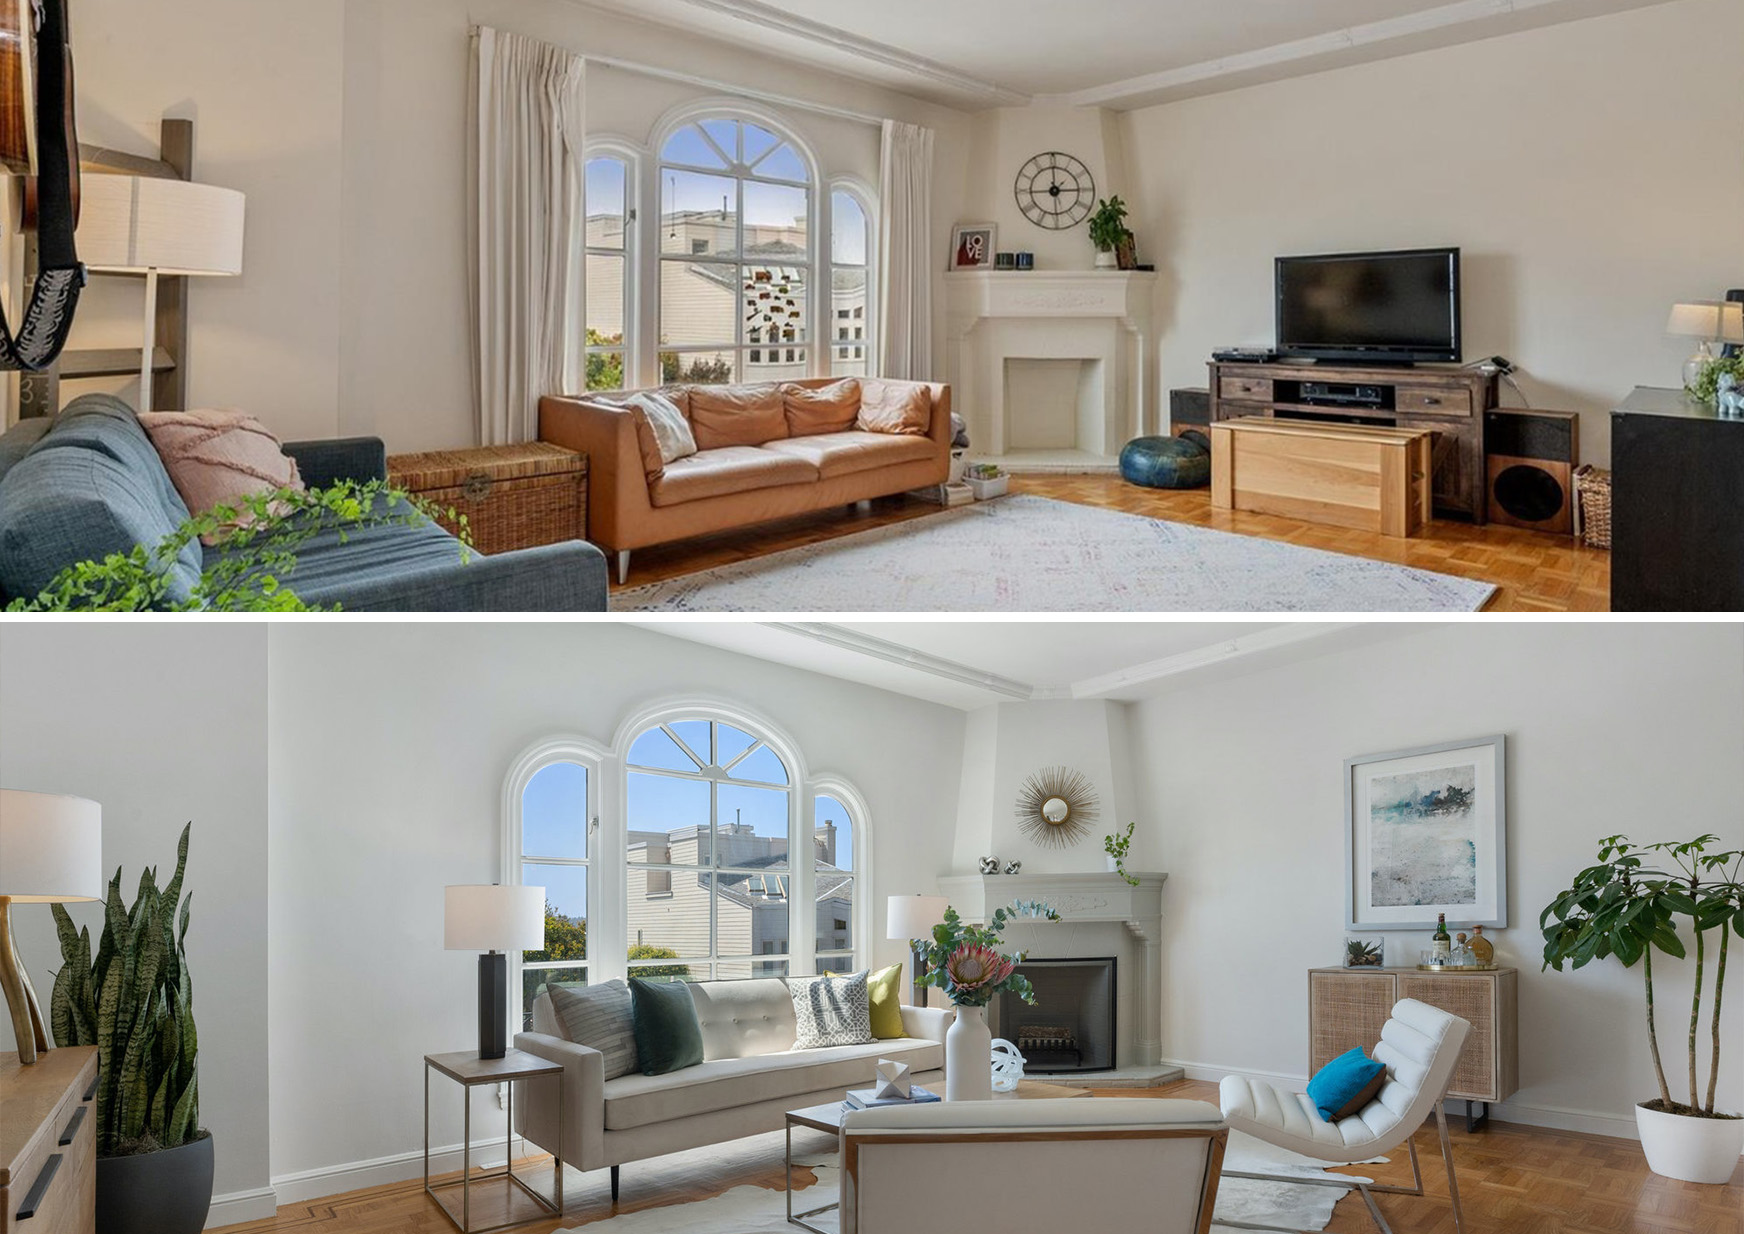 View of the living room at 50 Willard North, showing before and after new paint